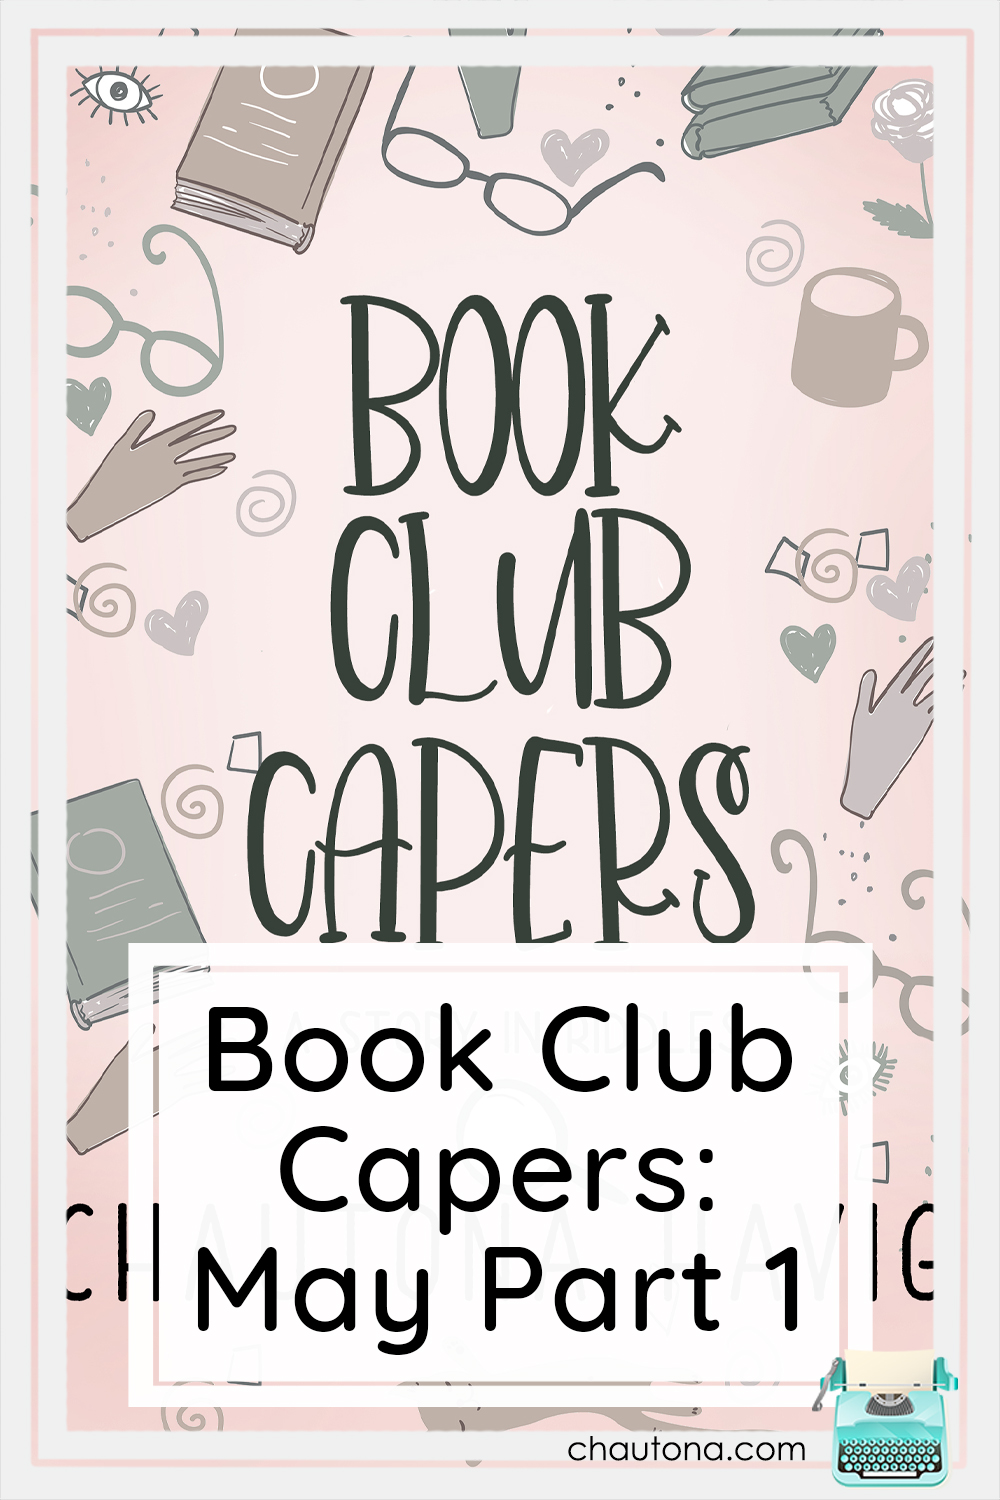 Book Club Capers May Part One is here! And oh, my word! I'm freaking out over this riddle. Figure it out, folks. SAVE JONAS! via @chautonahavig